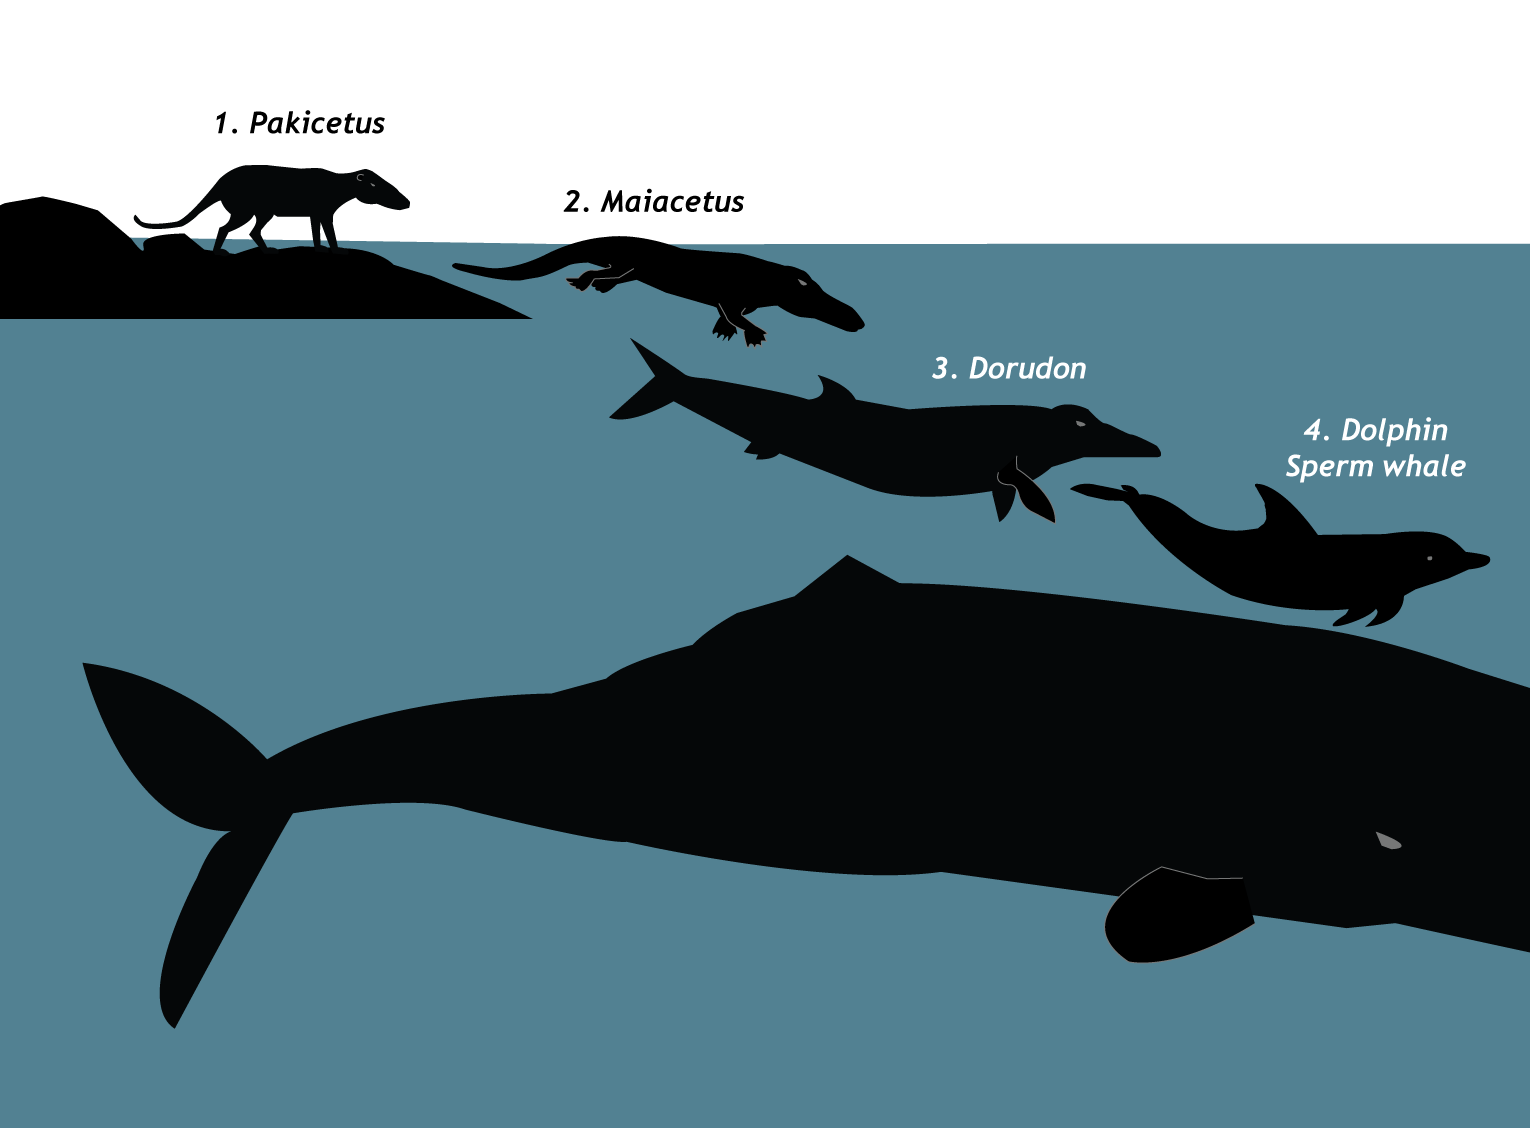 Evolution of whales. Image: Annica Roos, NRM